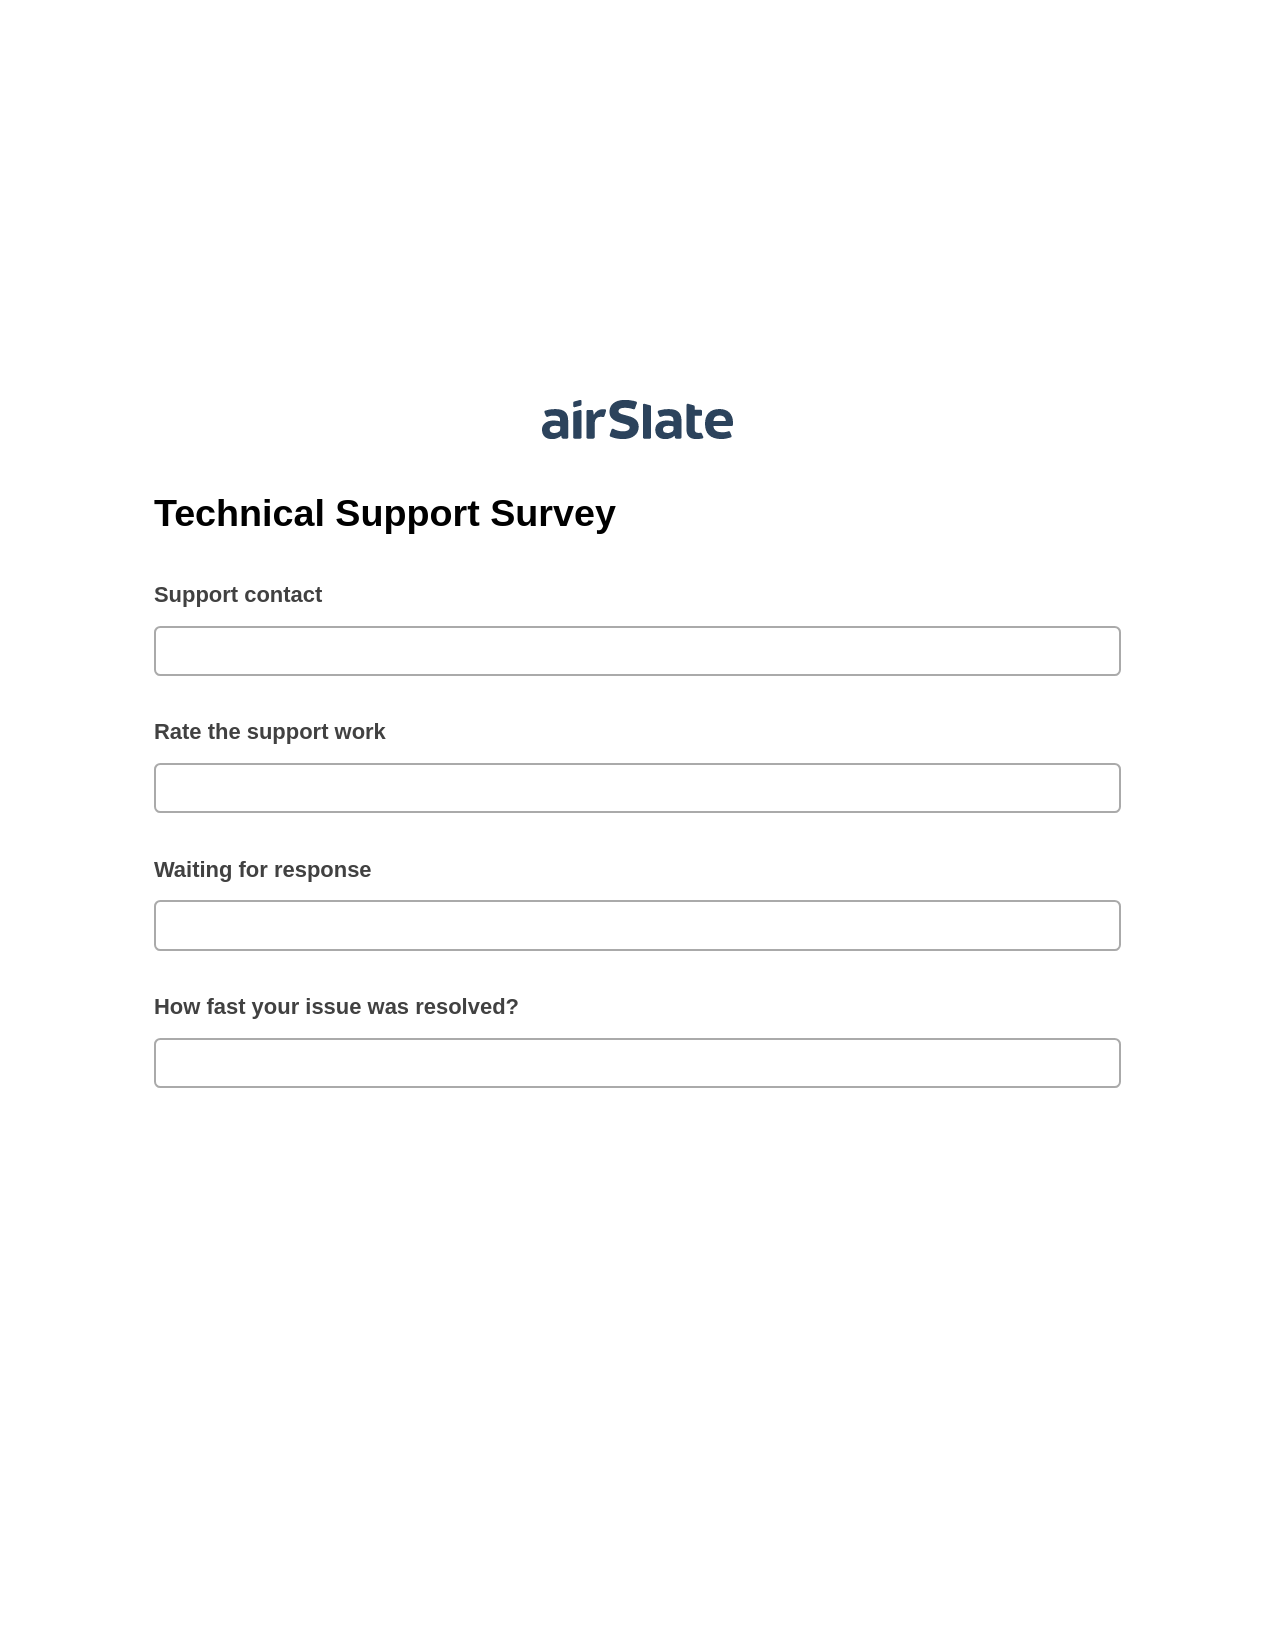 Multirole Technical Support Survey Pre-fill from another Slate Bot, Create NetSuite Record bot, Export to Salesforce Record Bot